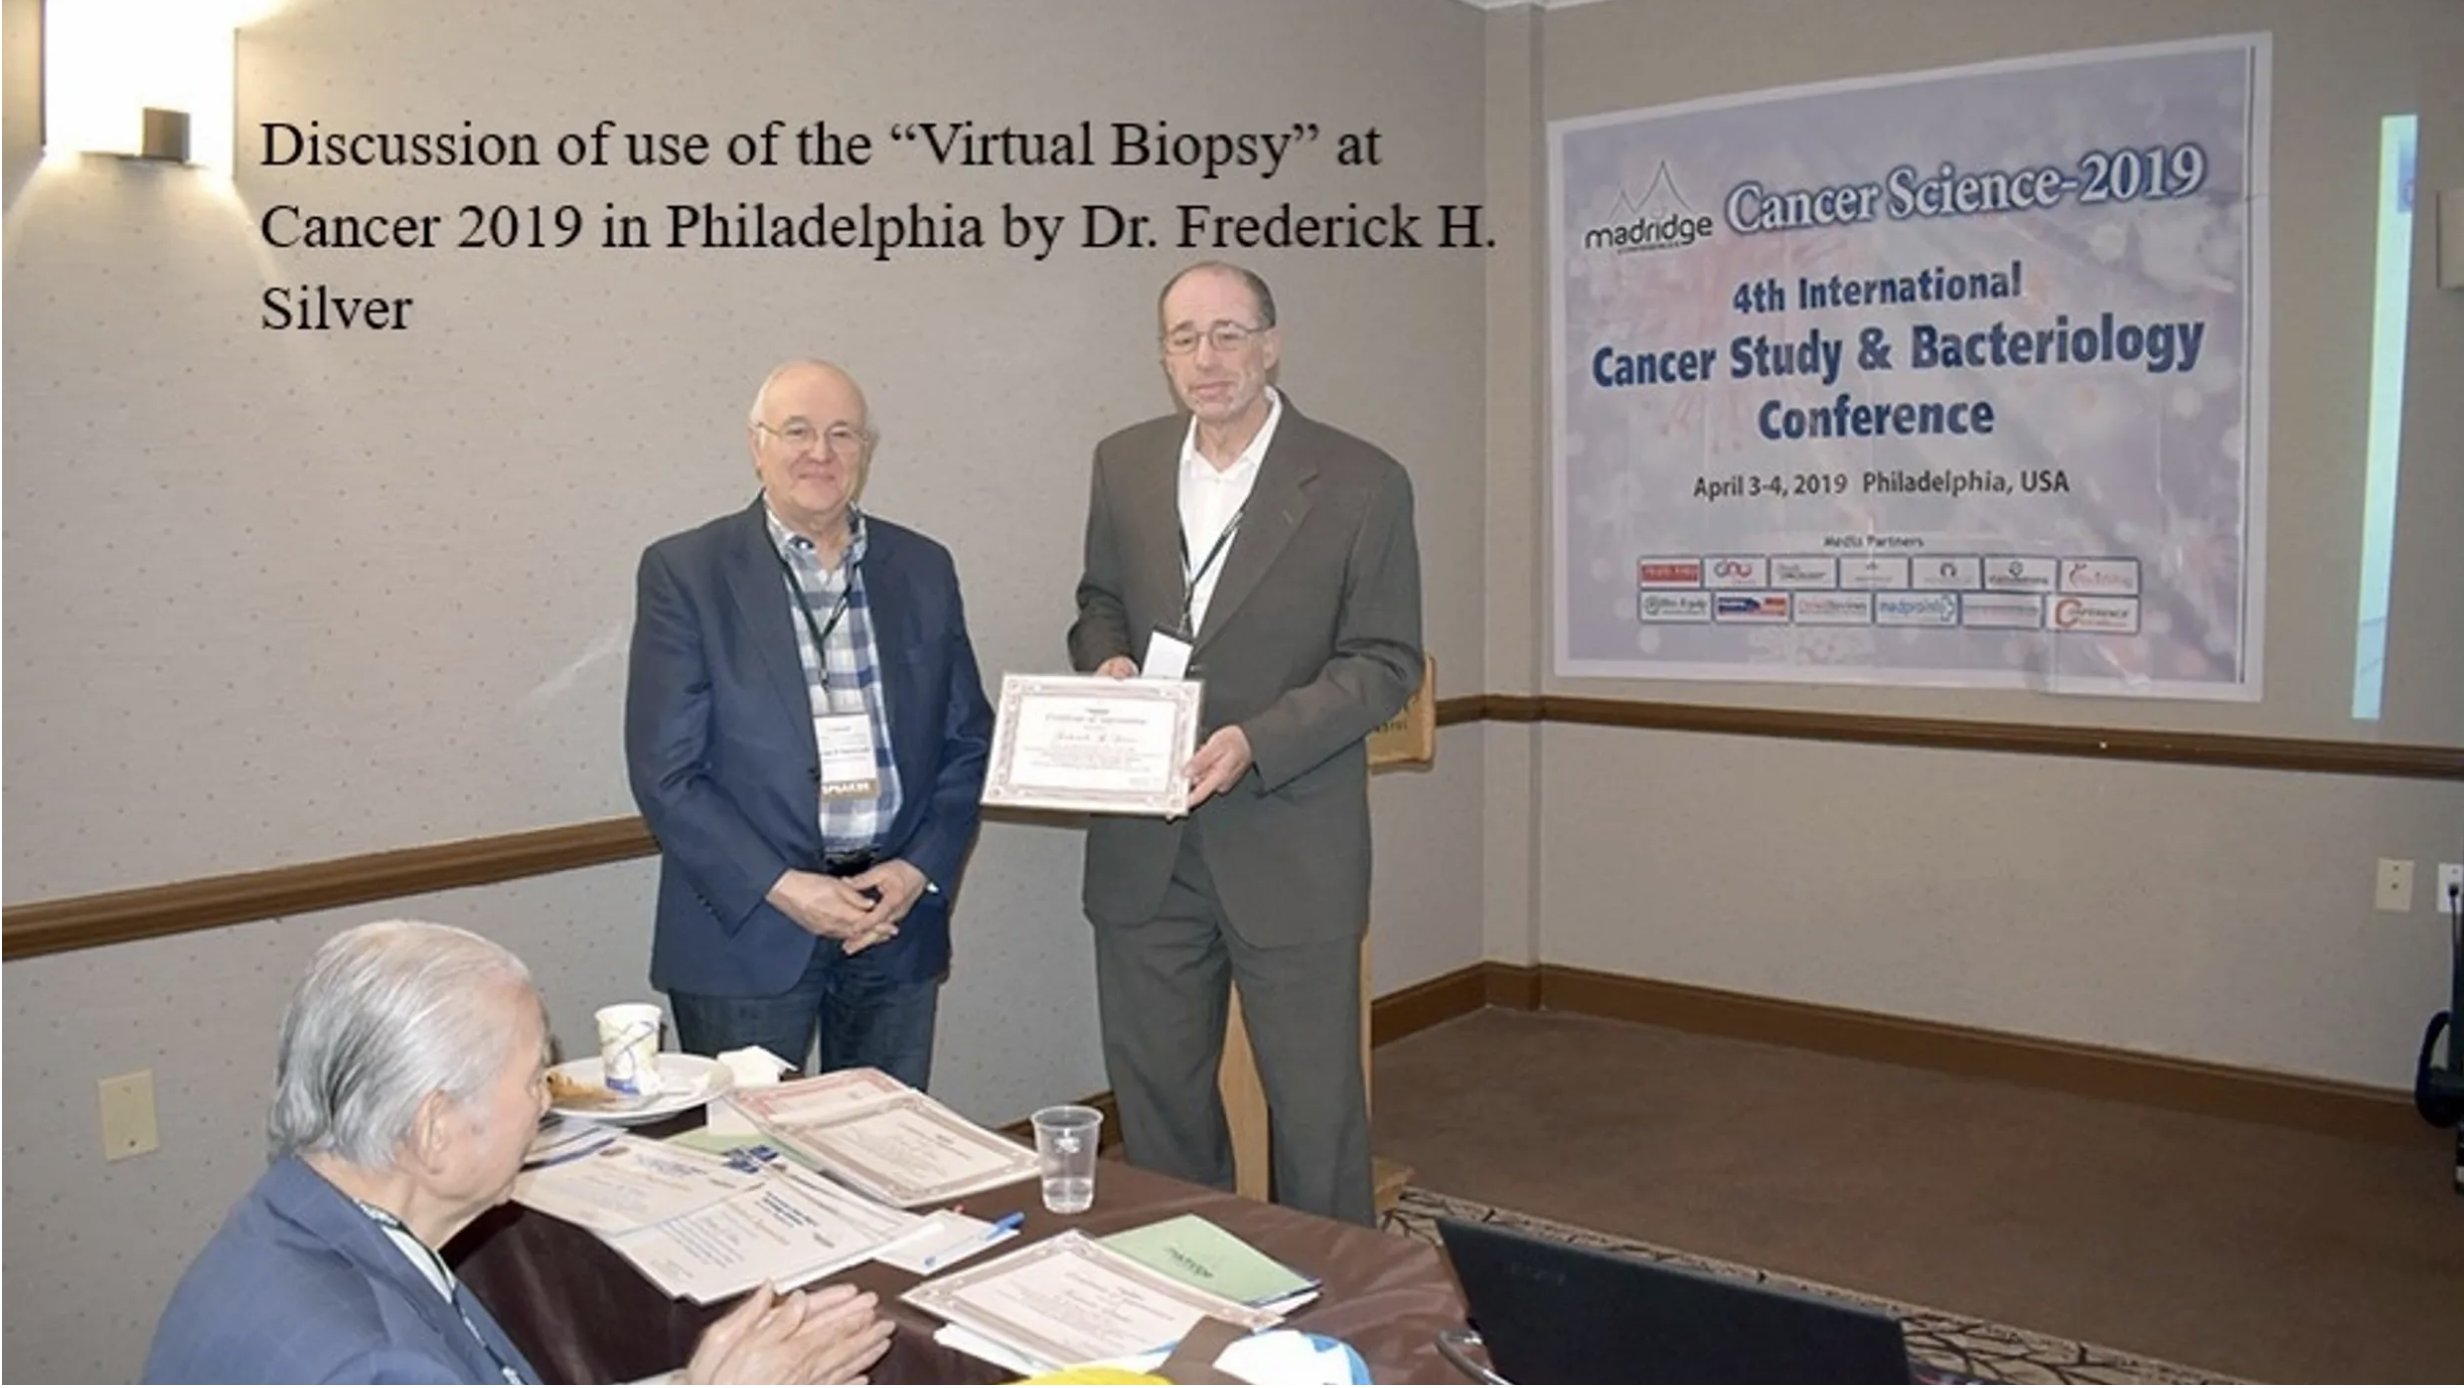 DISCUSSION OF THE USE OF “VIBRATIONAL VIRTUAL BIOPSY” AT CANCER 2019!